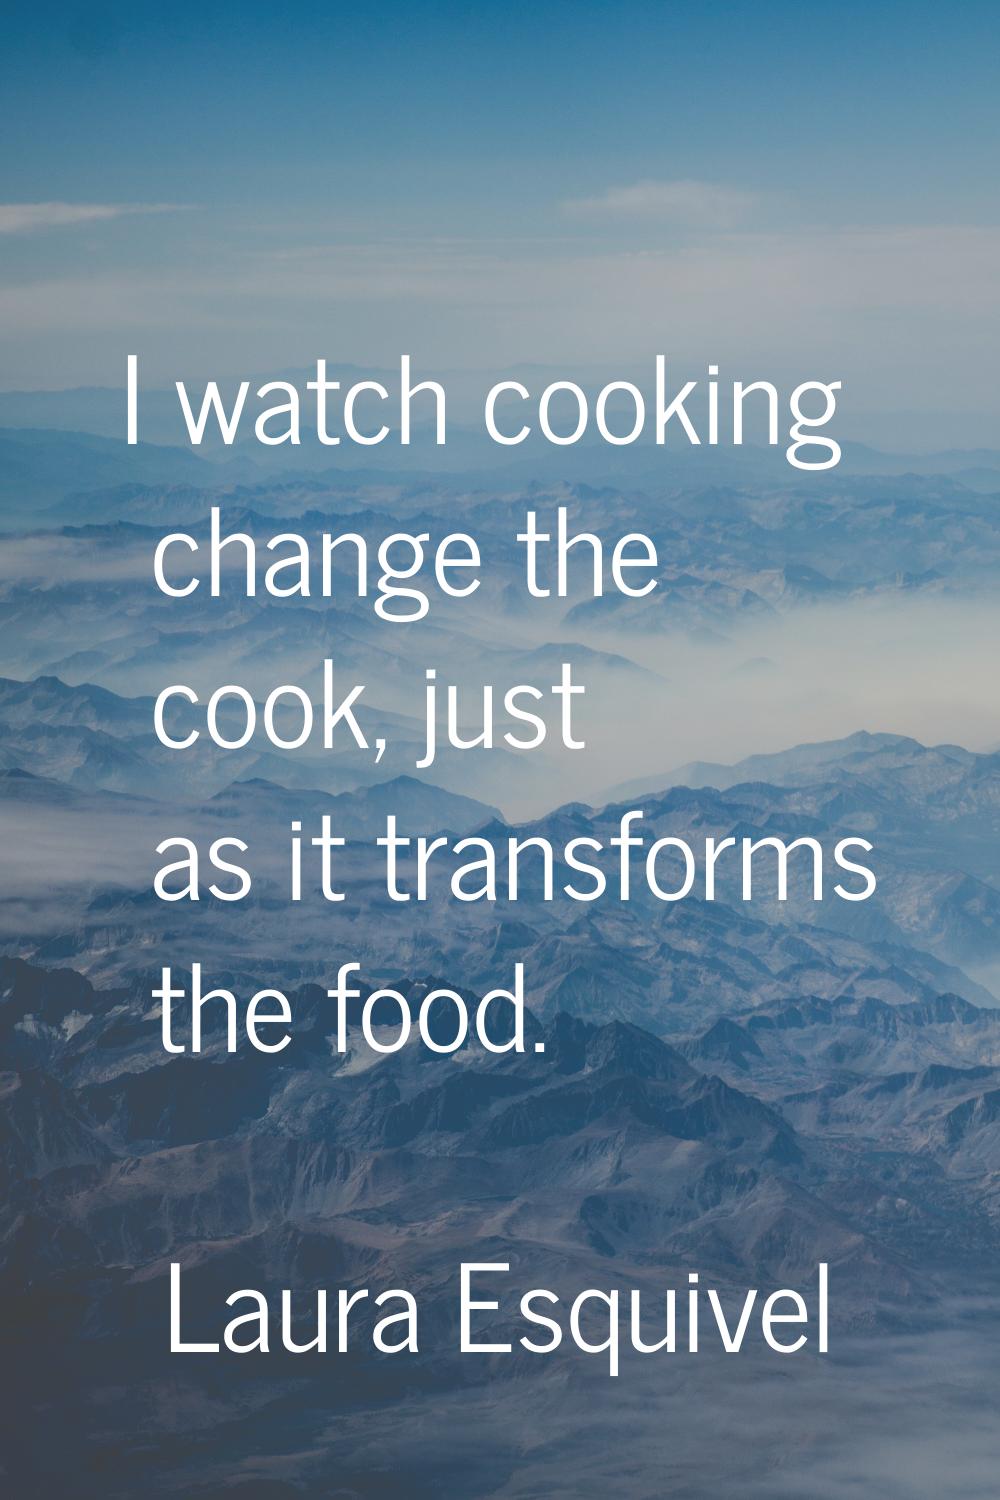 I watch cooking change the cook, just as it transforms the food.